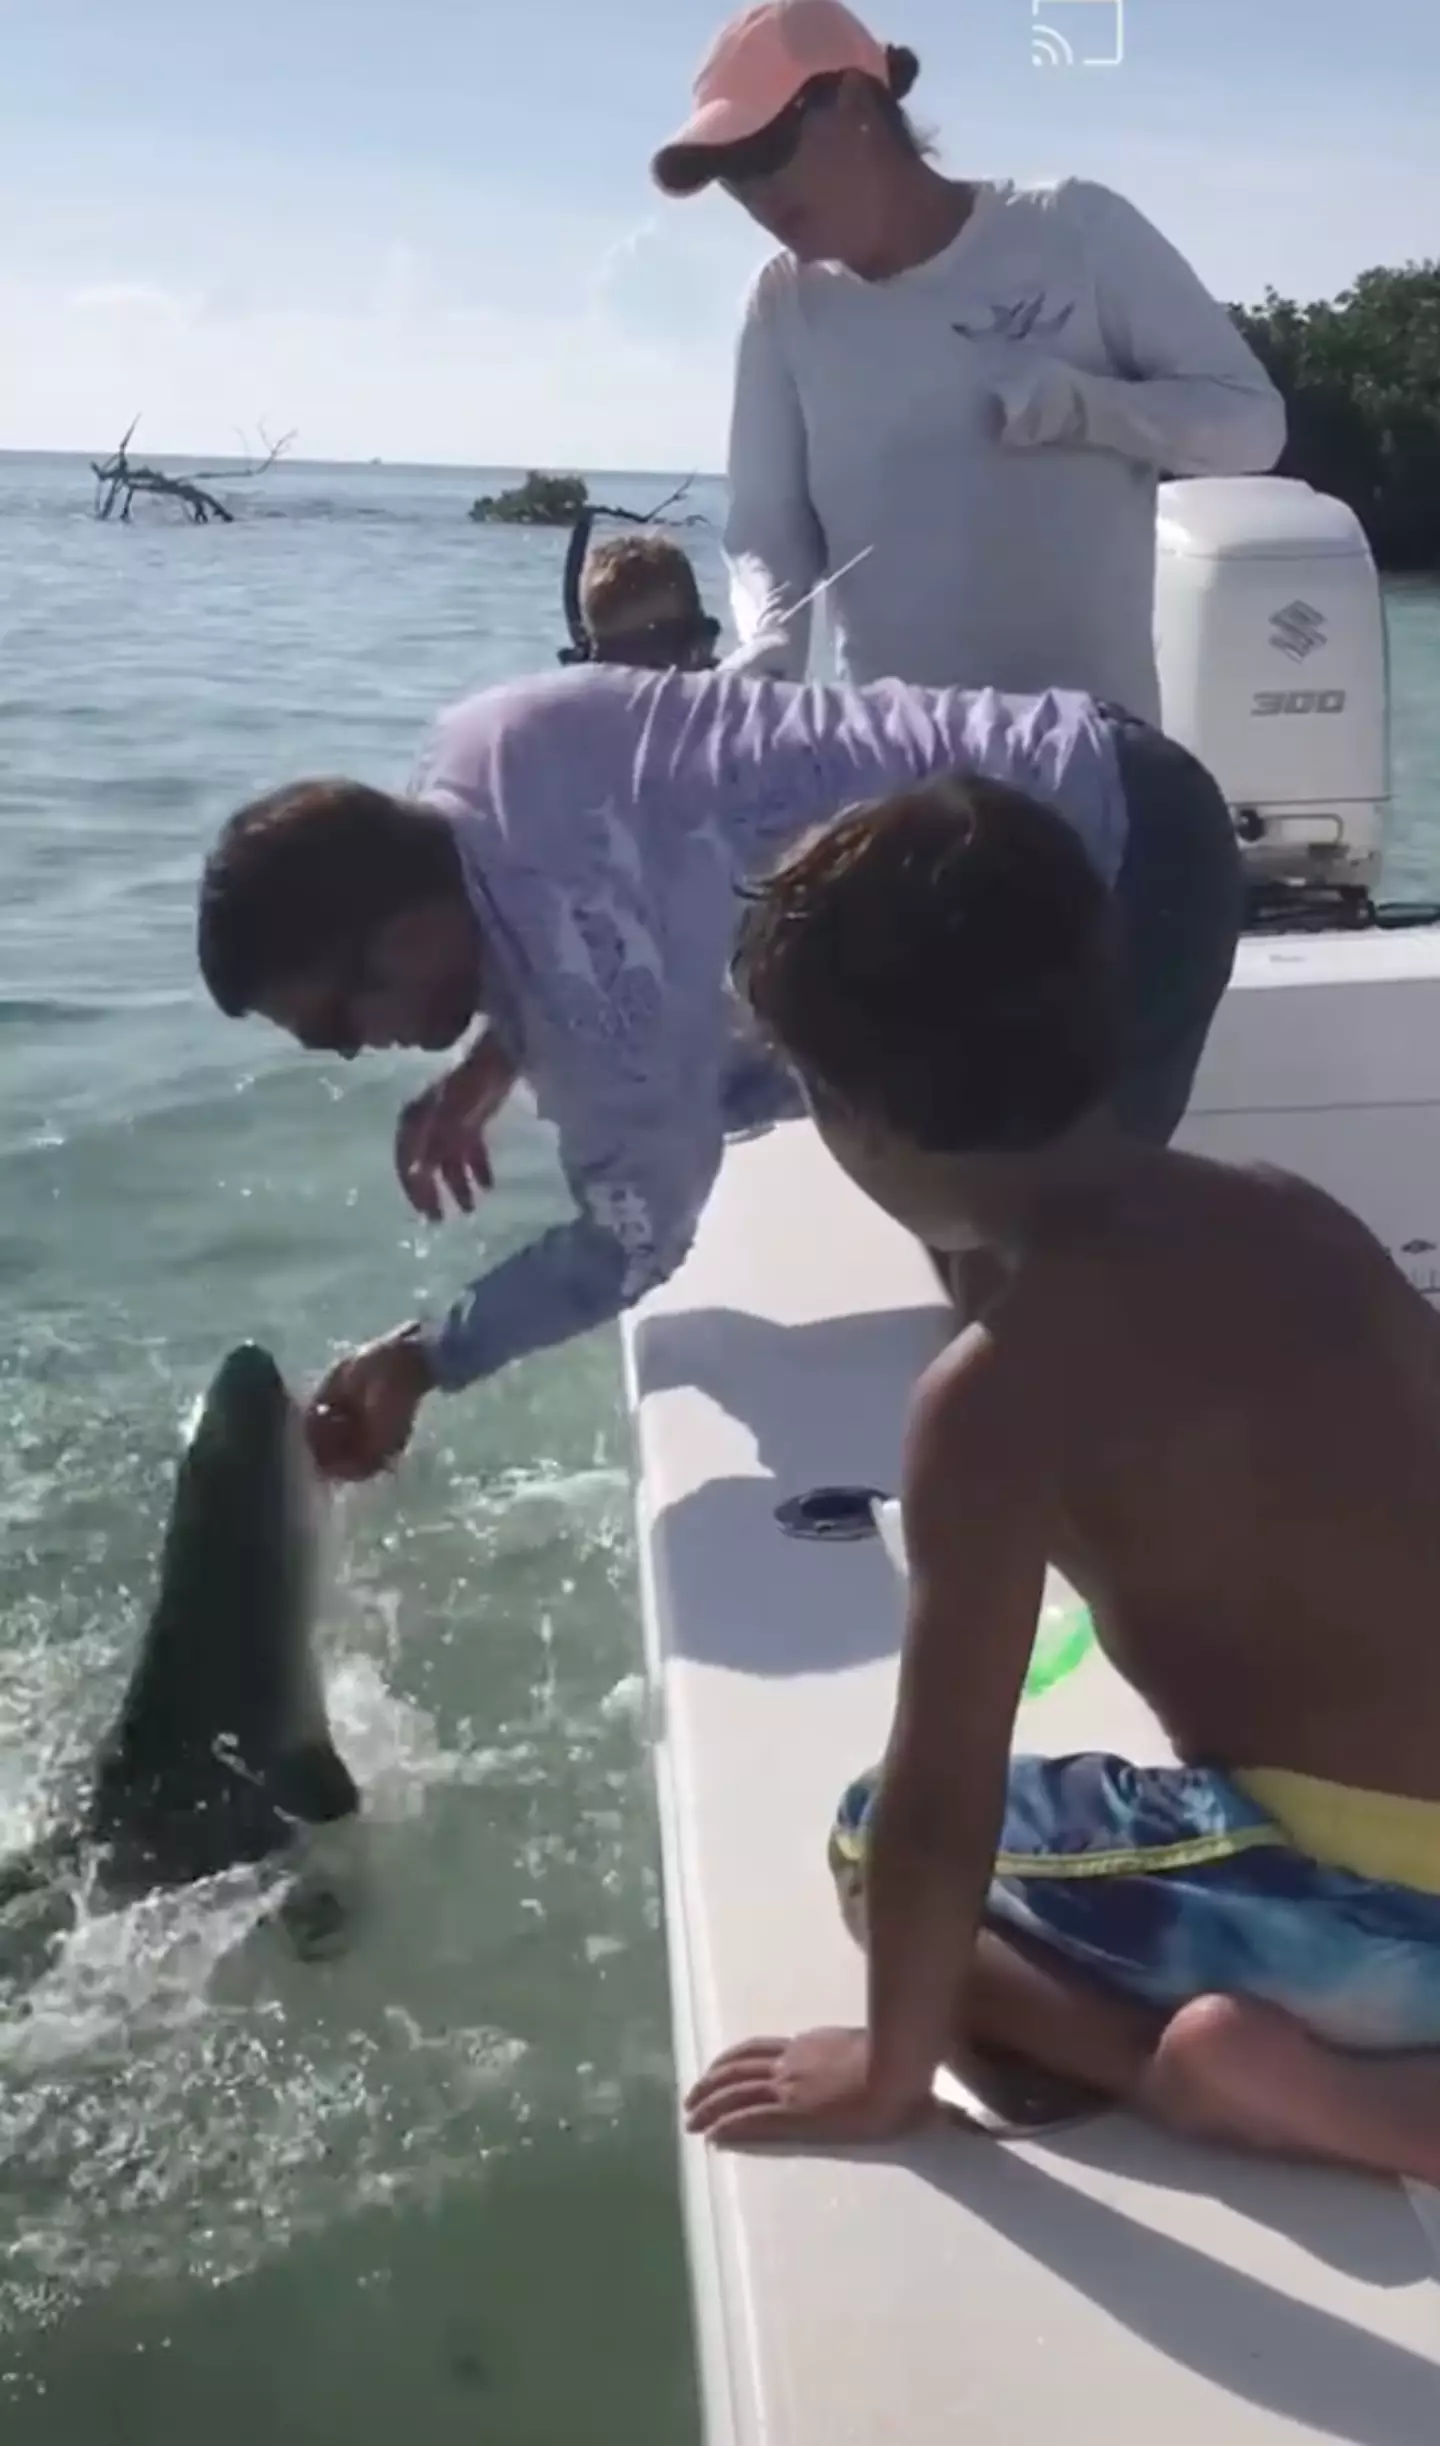 The shark suddenly latched onto his finger as he tried to remove the hook.